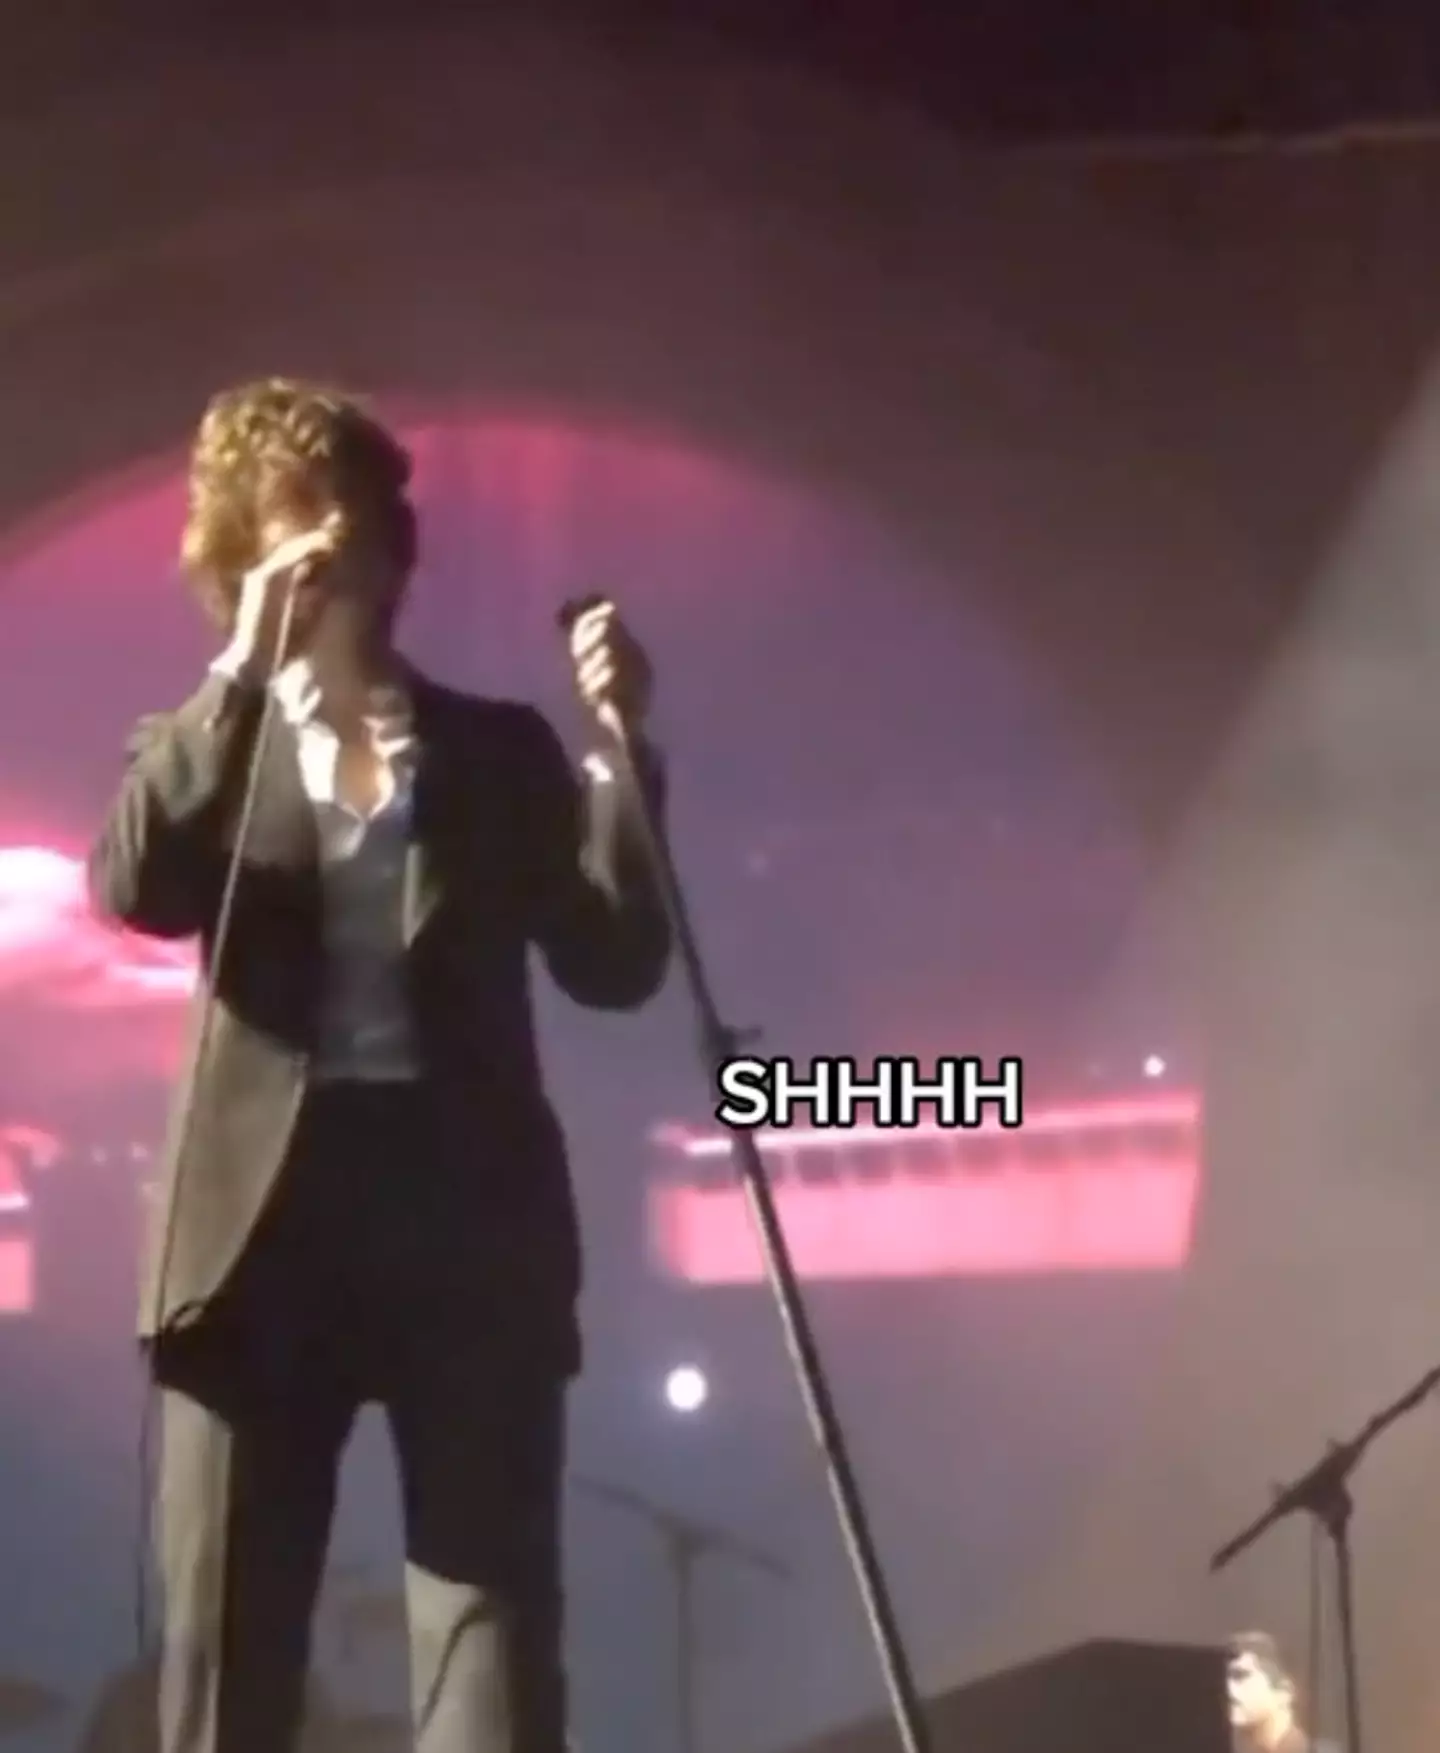 Alex Turner wasn't happy with the talking during the Arctic Monkeys' set.